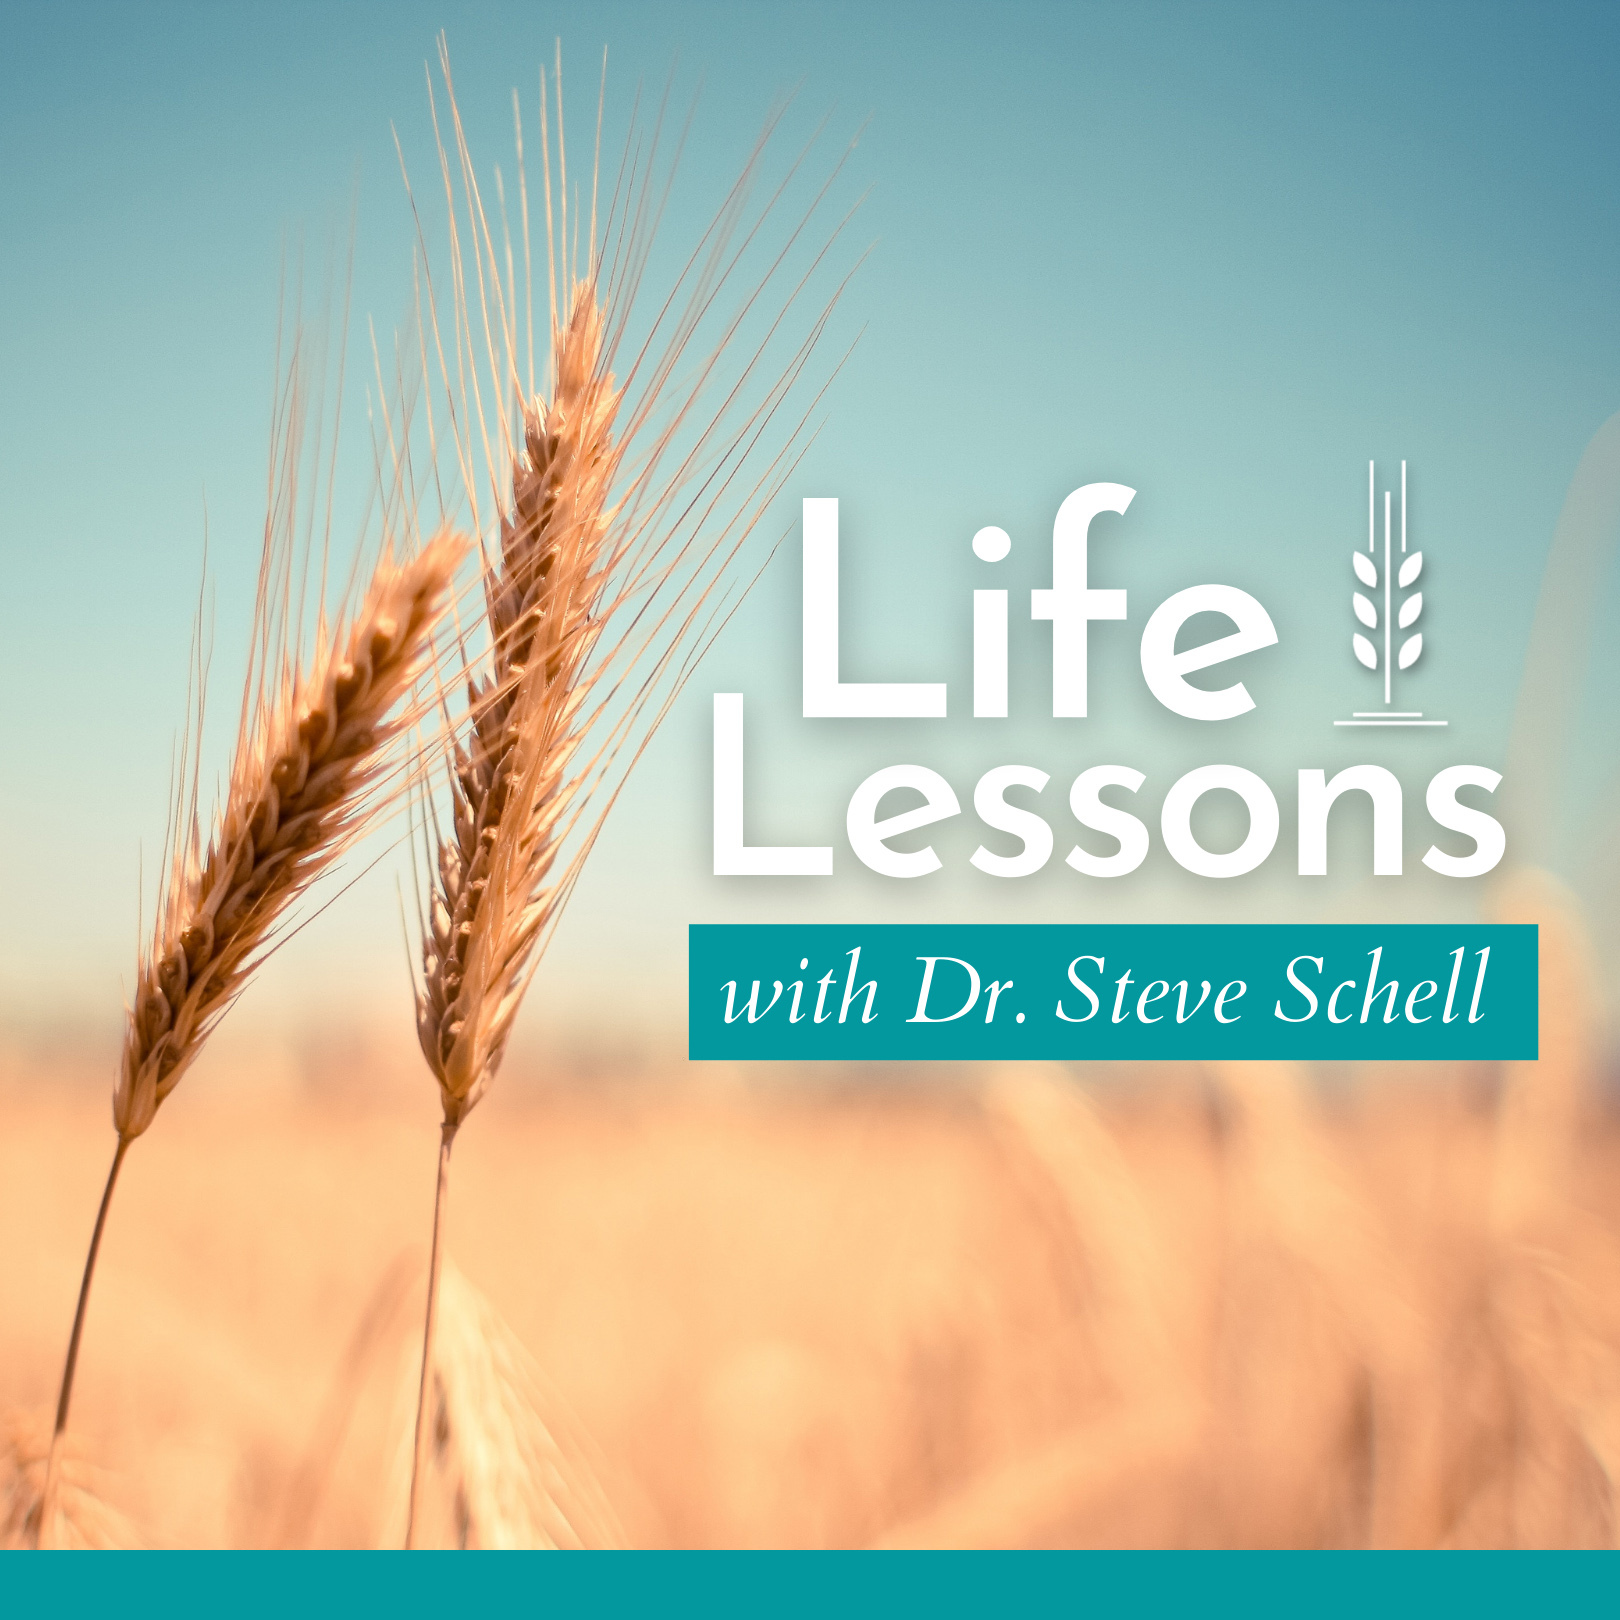 Life Lessons with Dr. Steve Schell